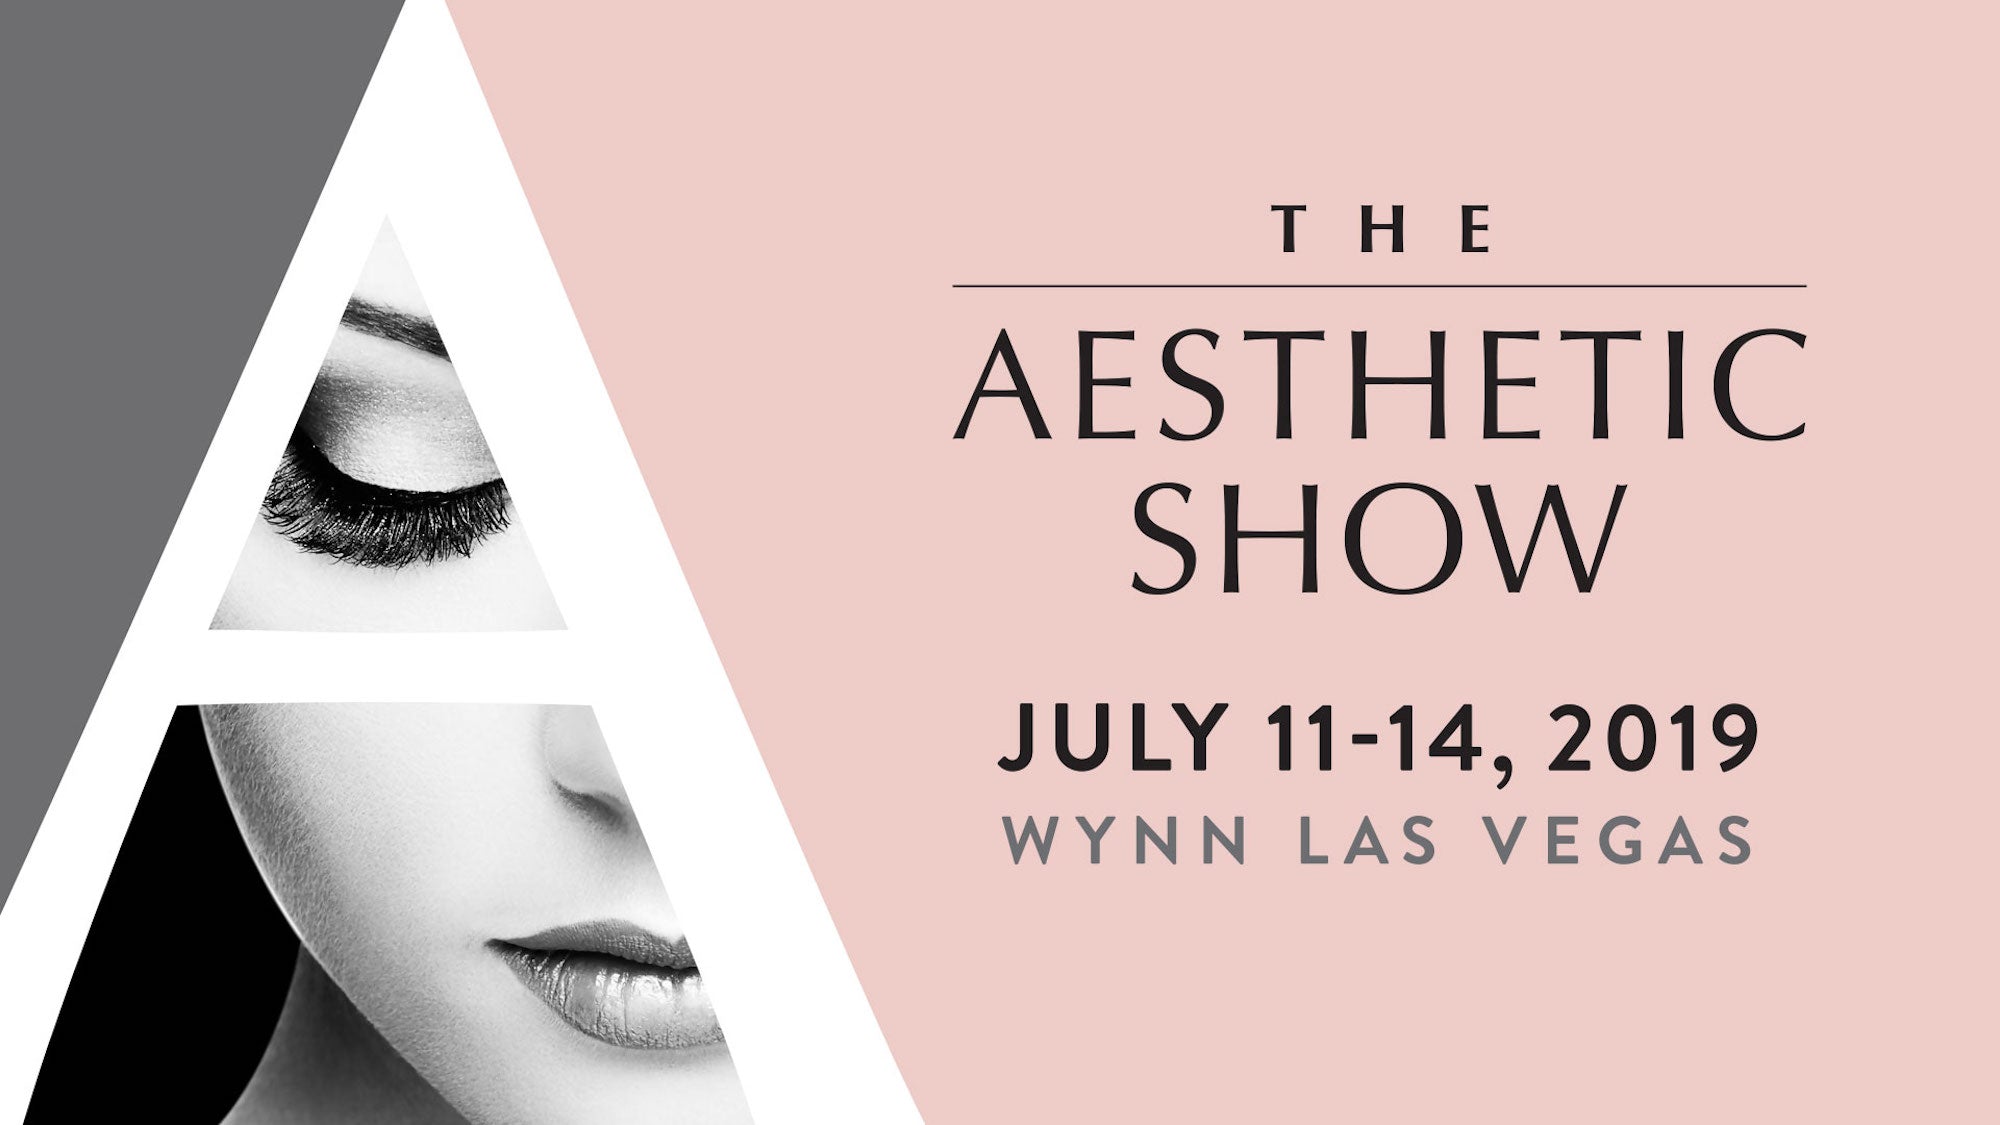 The Aesthetic Show 2019 Highlights